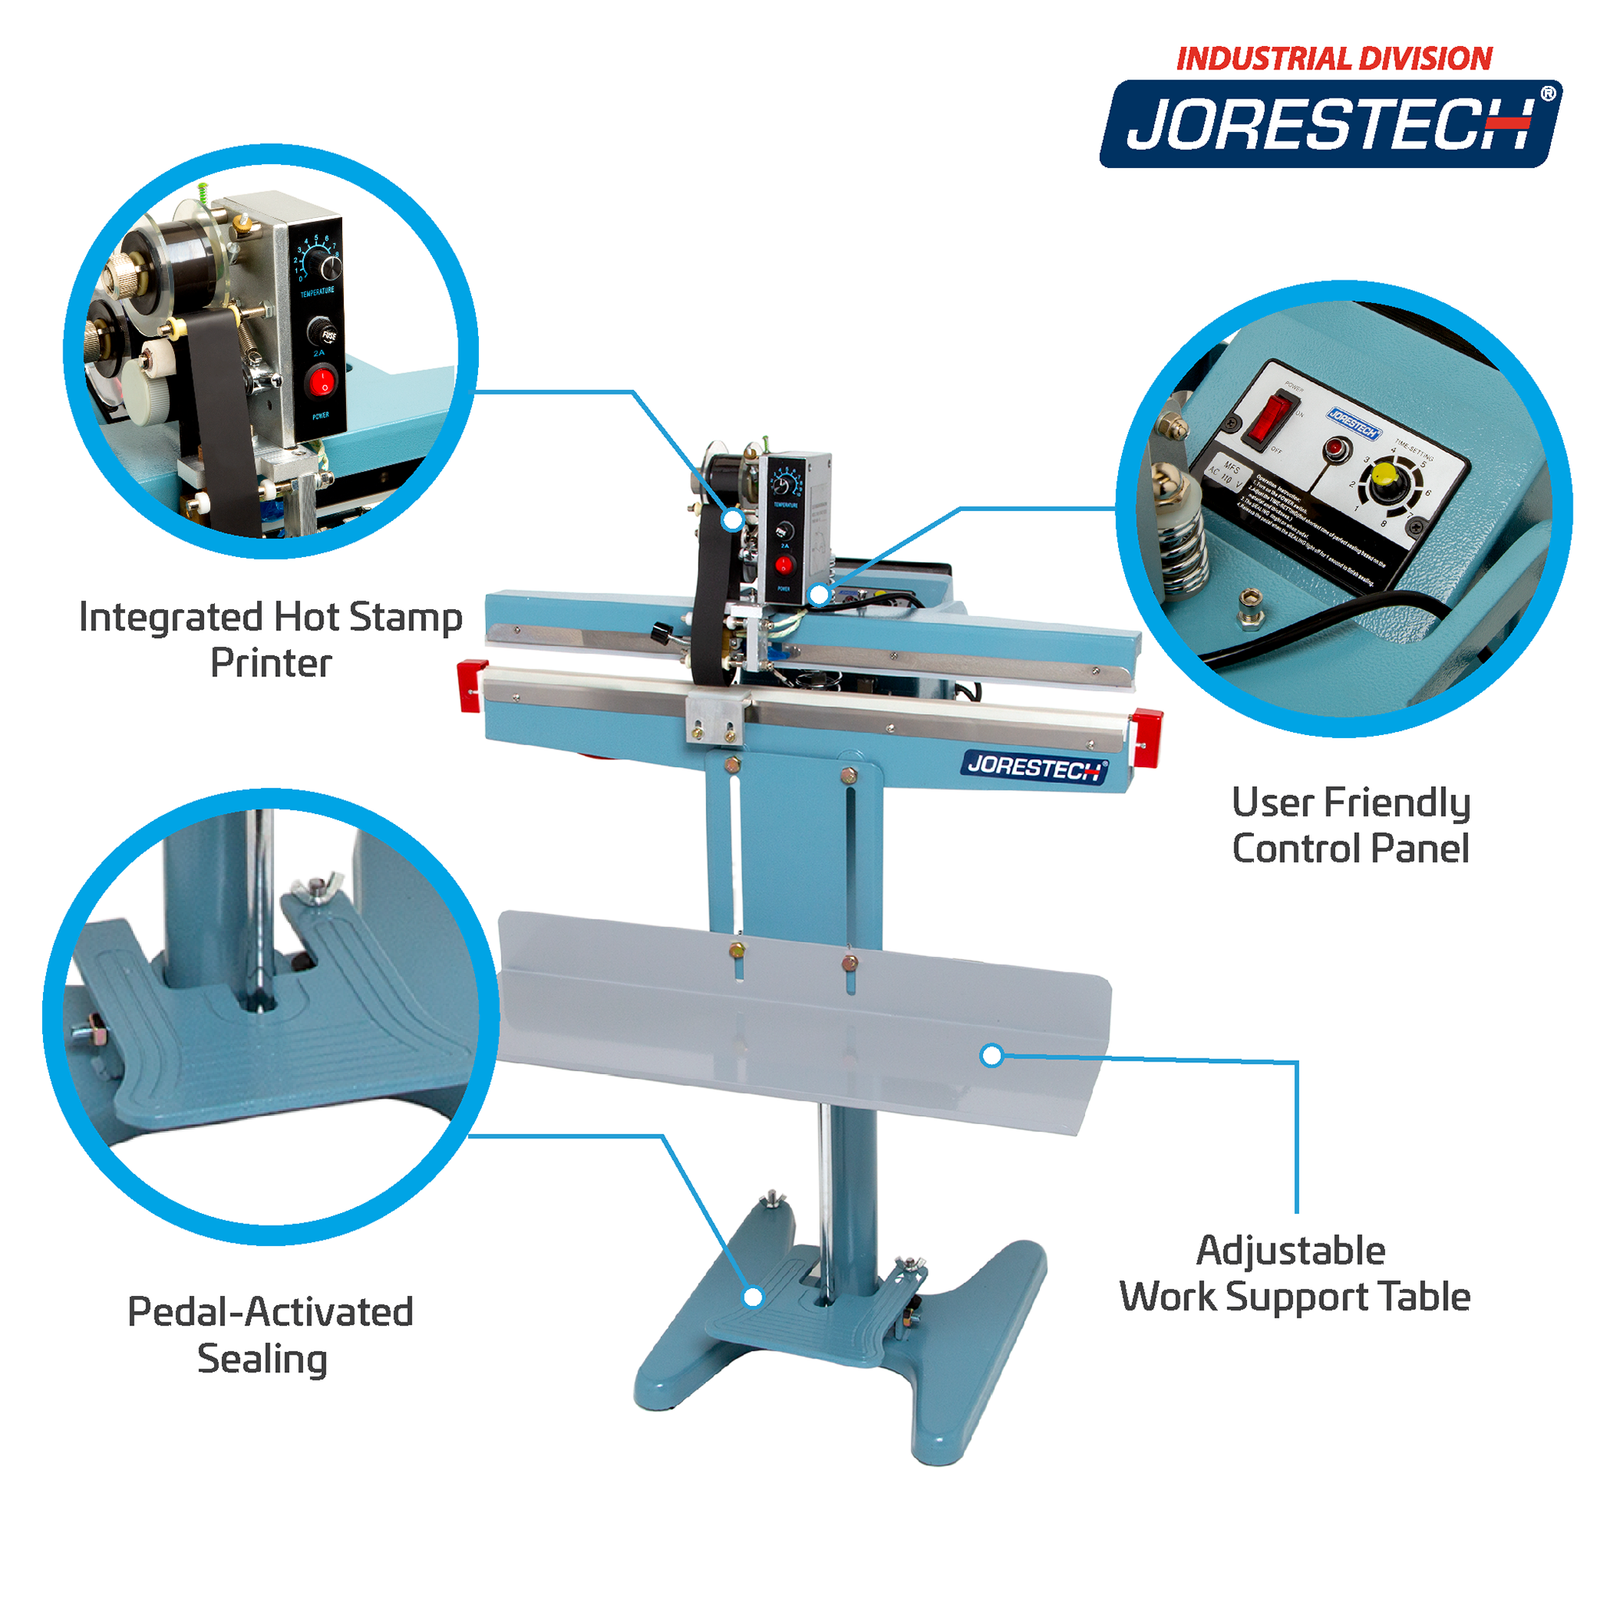 Infographic shows foot impulse bag sealer. Highlighted features include, Integrated Hot Stamp Printer, User Friendly Control Panel, Pedal-Activated Sealing, and Adjustable Work Support Table. Close-ups of hot stamp printer, foot pedal, and control panel.